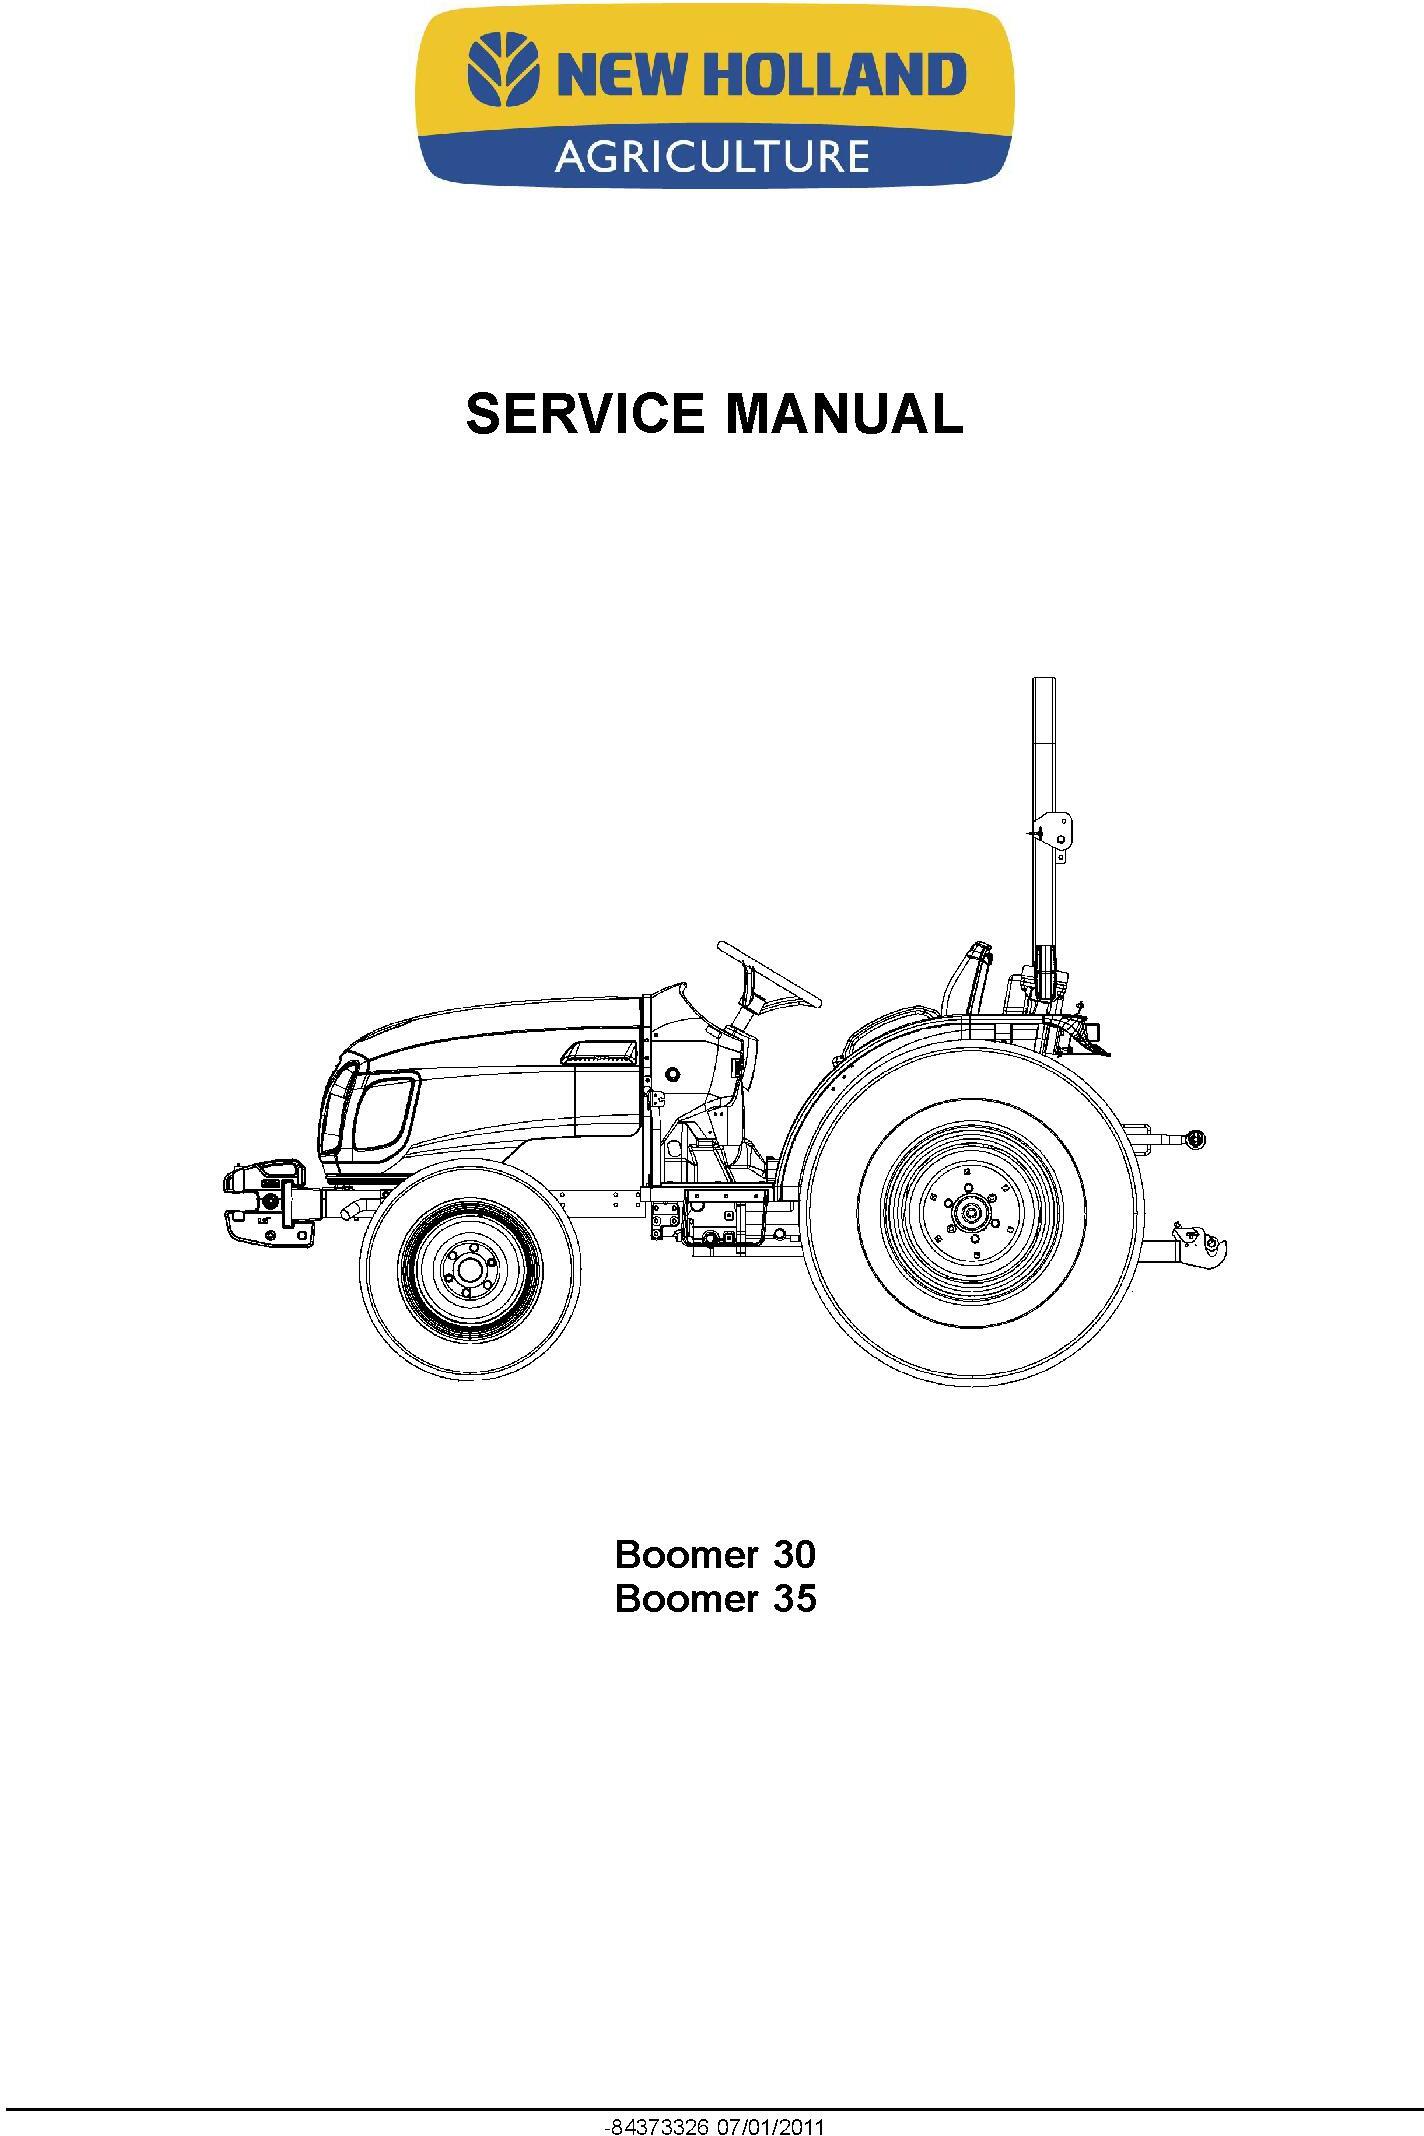 New Holland Boomer 30, Boomer 35 Compact Tractor Service Manual - 1